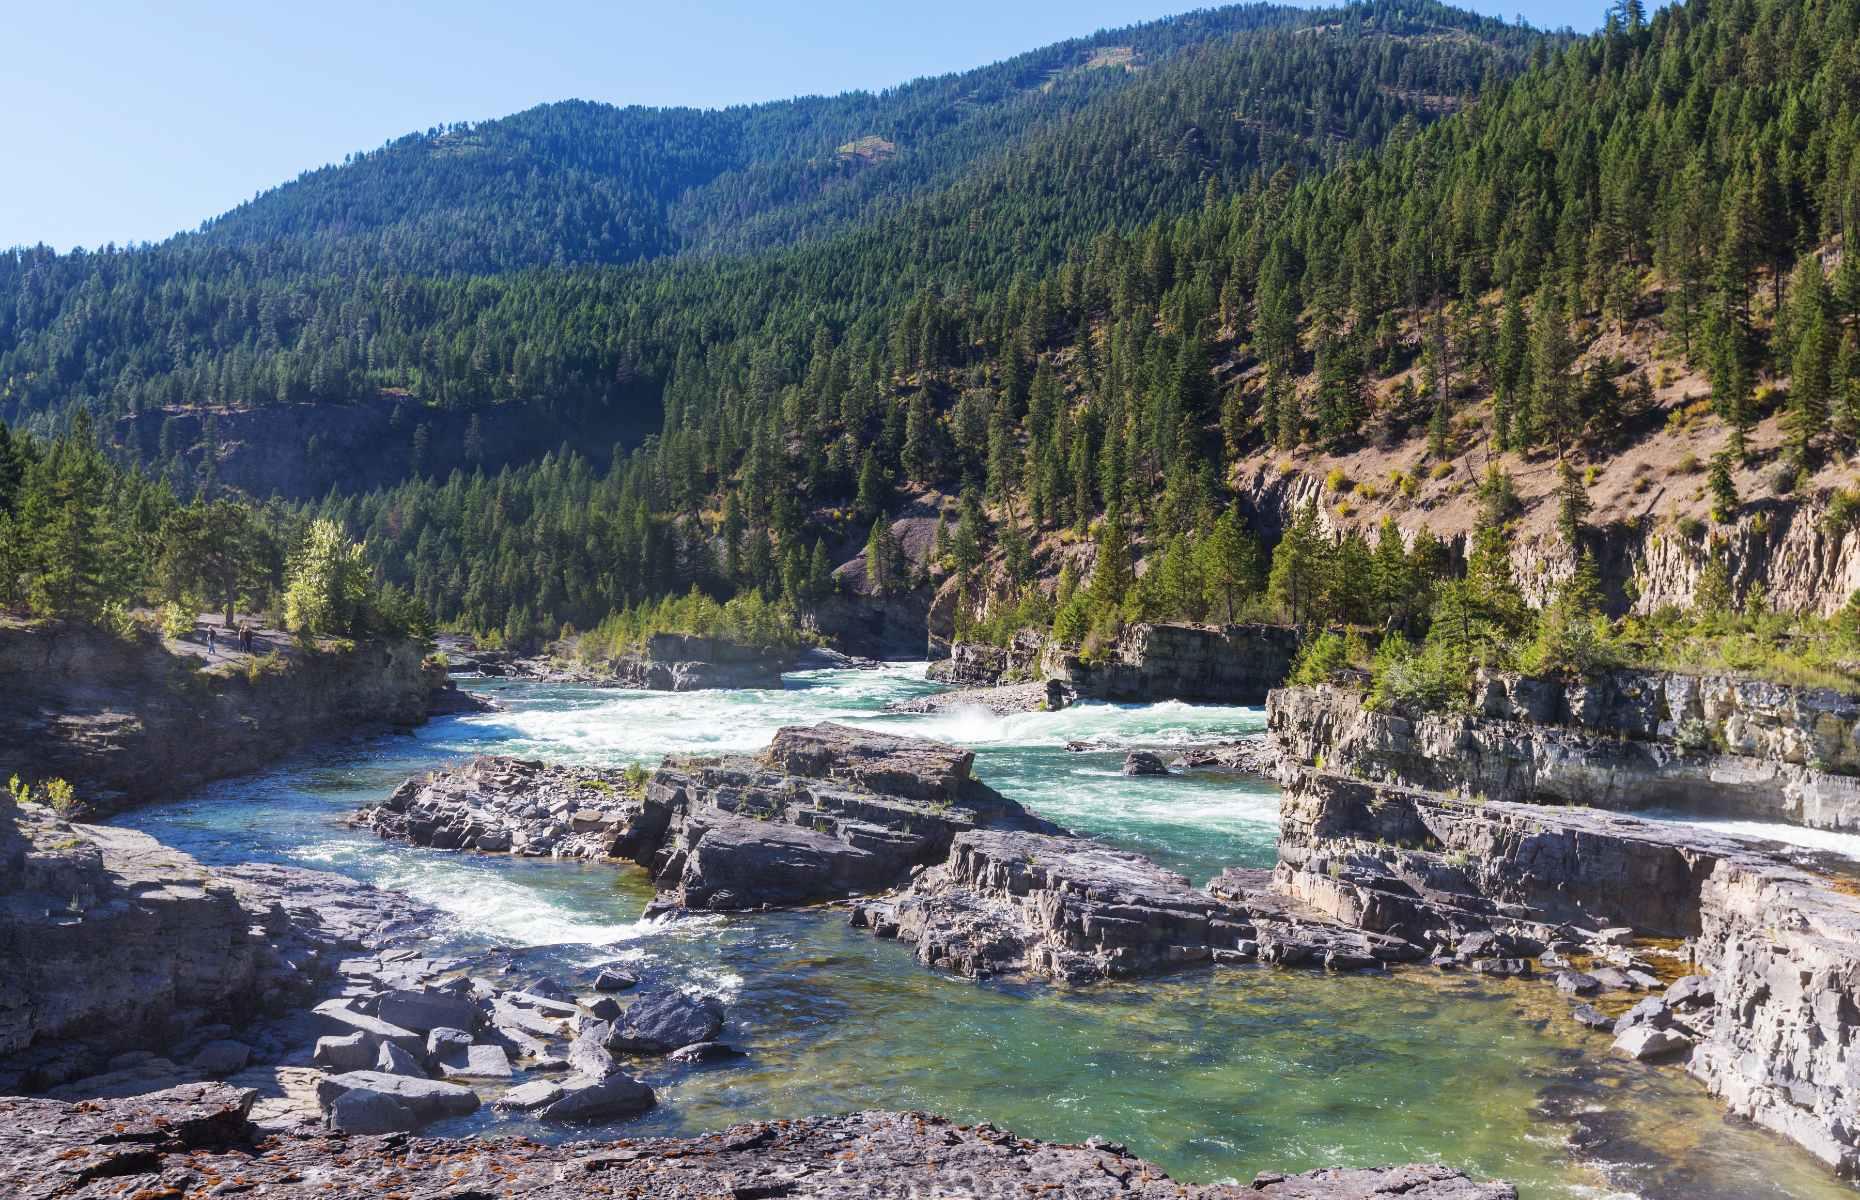 <p>The largest undammed falls in Montana (and one of the largest free-flowing falls in the American northwest), Kootenai Falls is certainly impressive. The rushing cascade sits on the sacred lands of the Kootenai Tribe, to whom the falls represent the center of the world.</p>  <p>Community members come here for spiritual guidance and direction from their ancestors. For visitors, this is a place to feel grounded and close to nature. Follow the forest trail from the parking lot down to the Swinging Bridge, which promises a great perspective of the falls if you’ve got a head for heights (and aren’t put off by the wobble).</p>